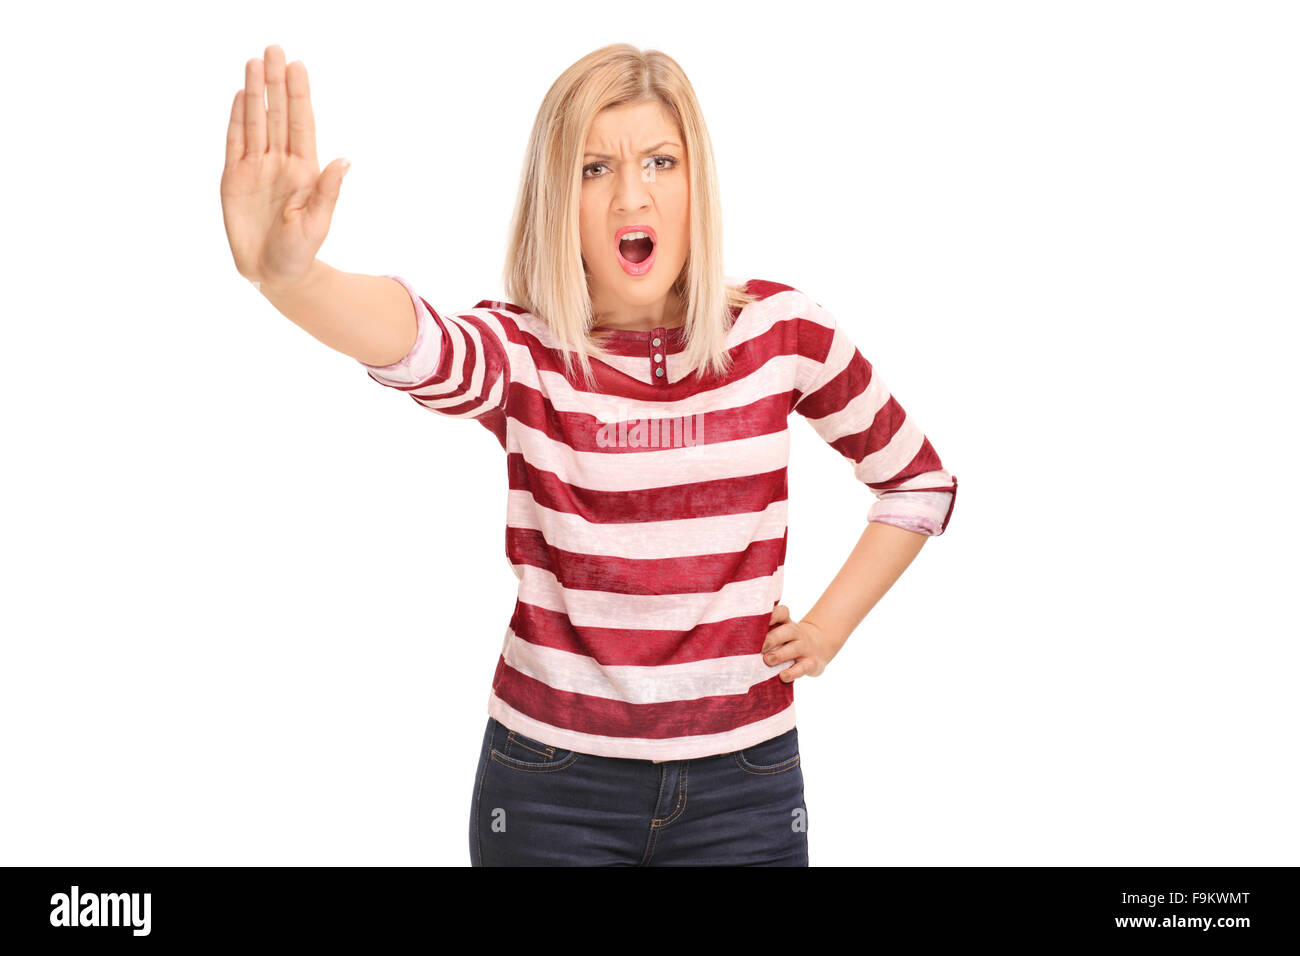 Displeased woman making a stop sign with her hand and looking at the camera isolated on white background Stock Photo